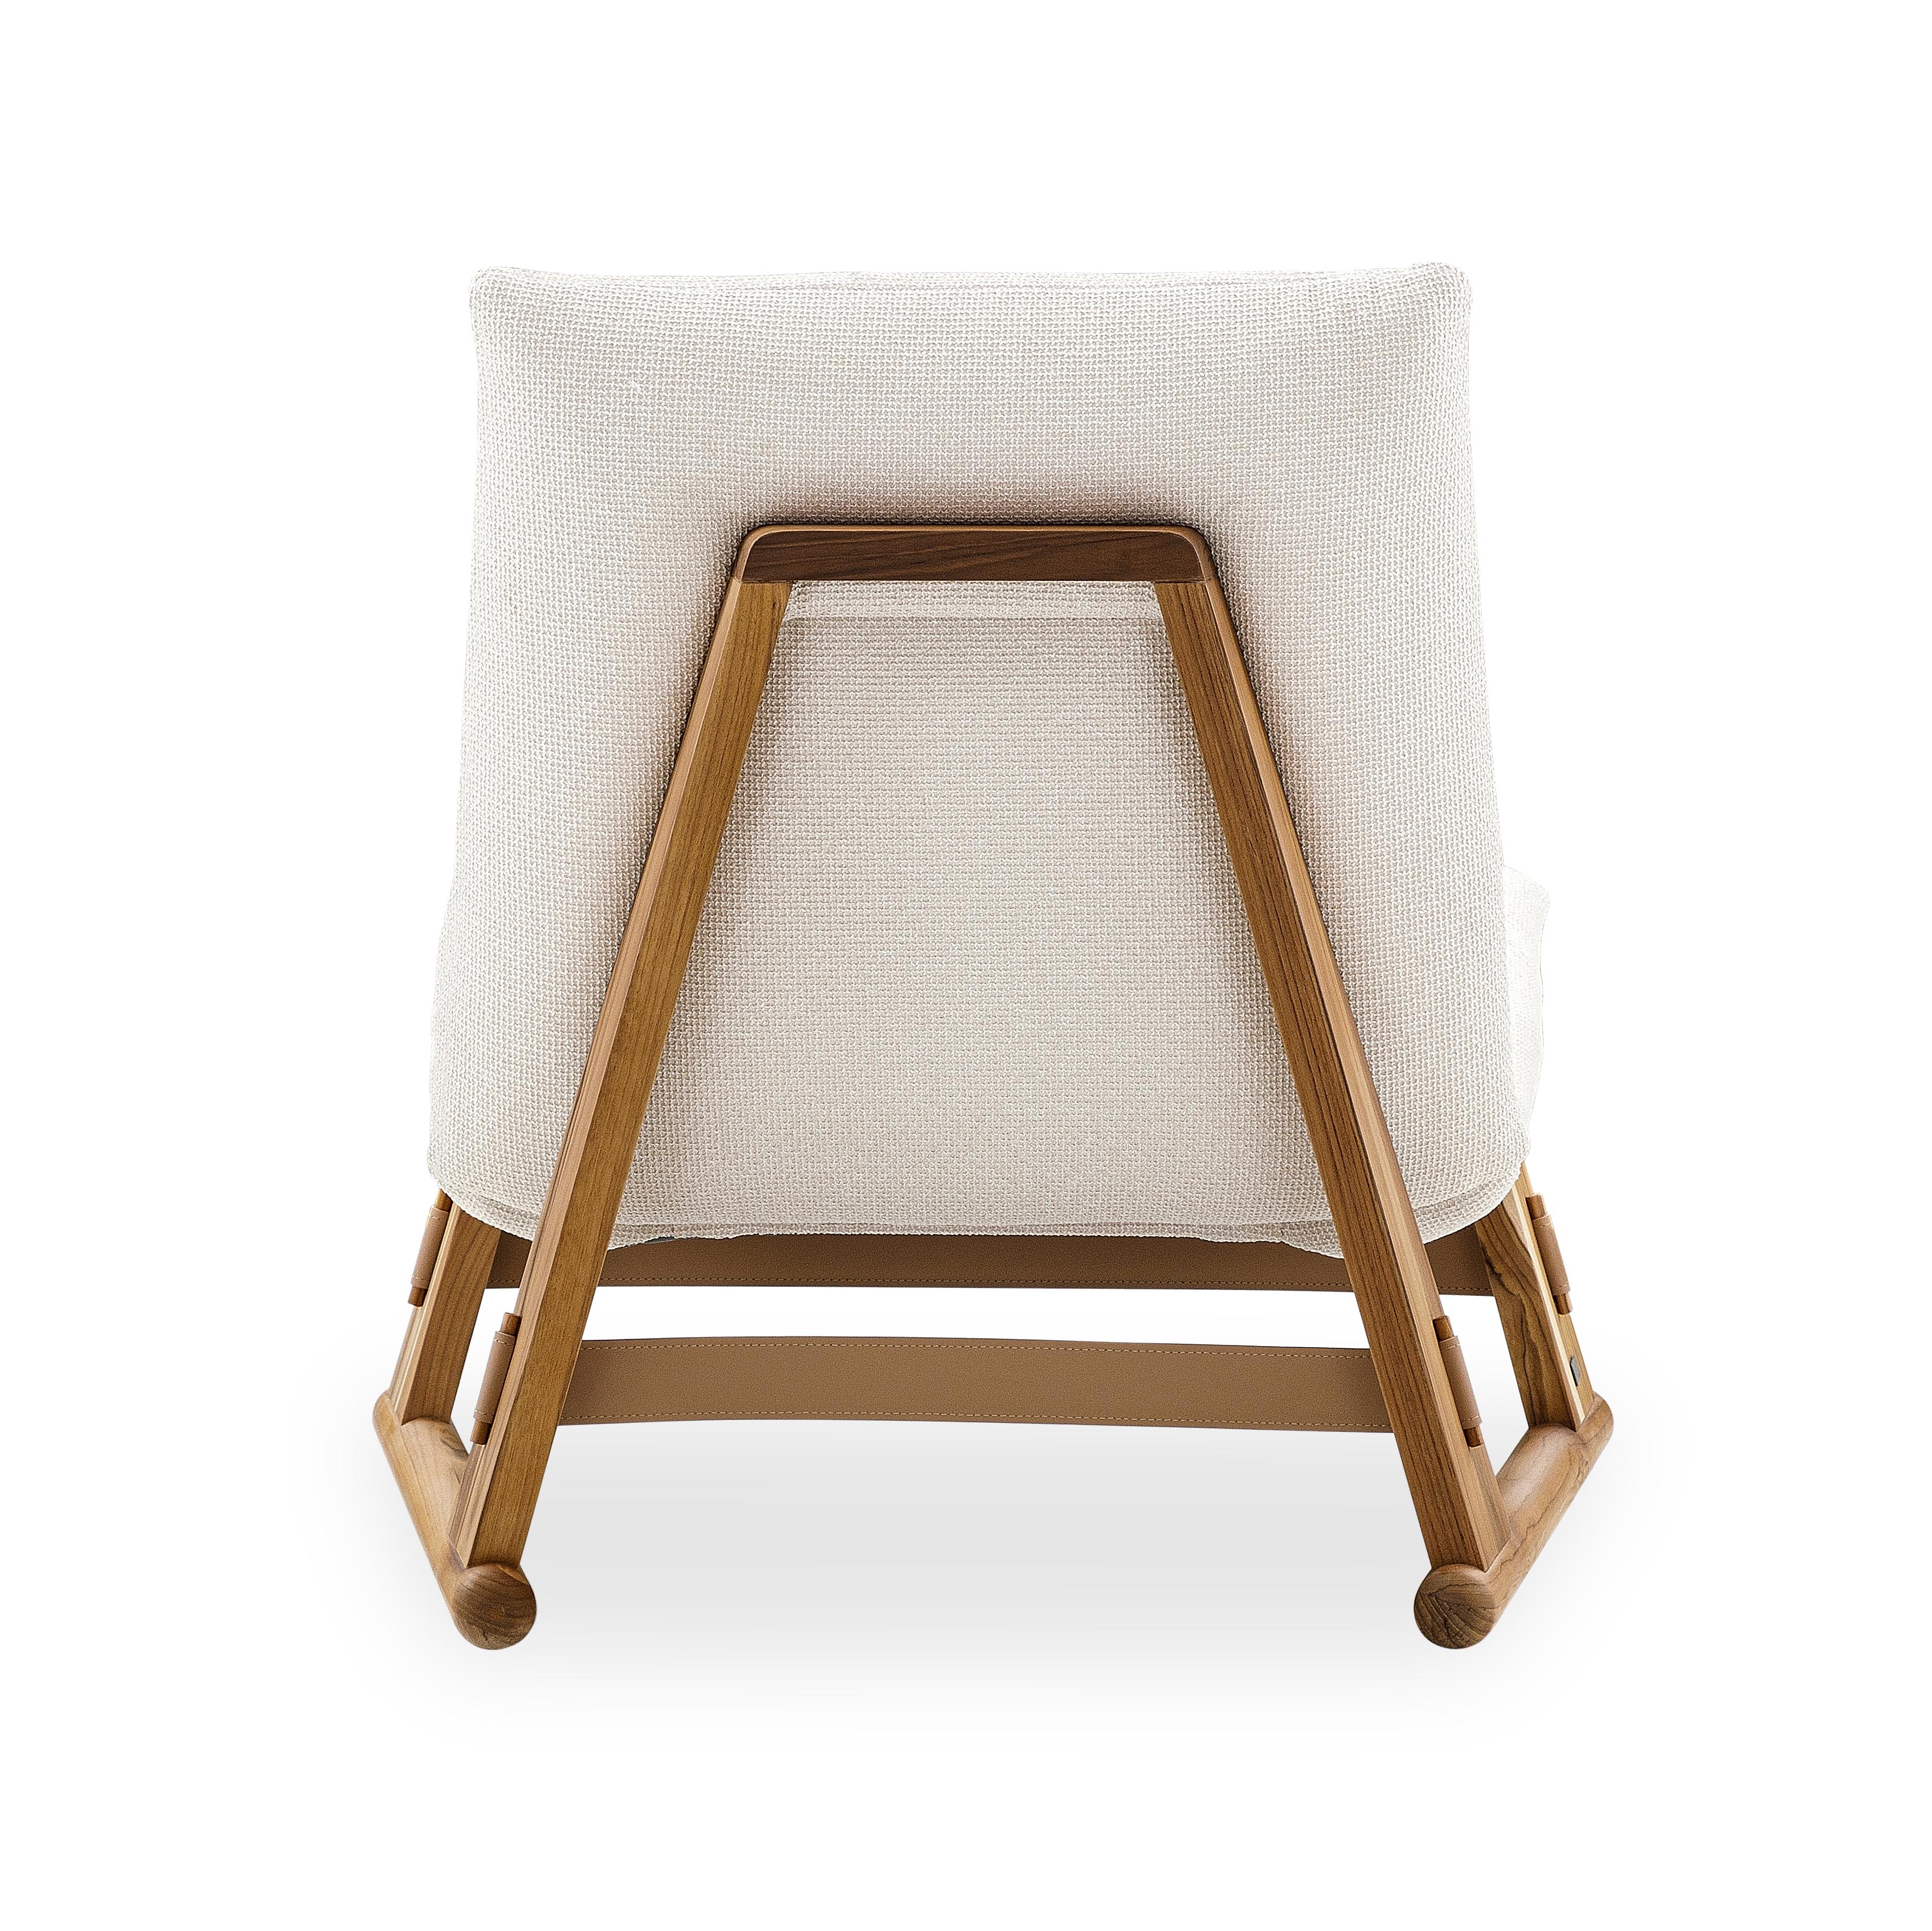 Upholstery Contemporary Maia Chair in Teak Wood Finish and White Fabric For Sale